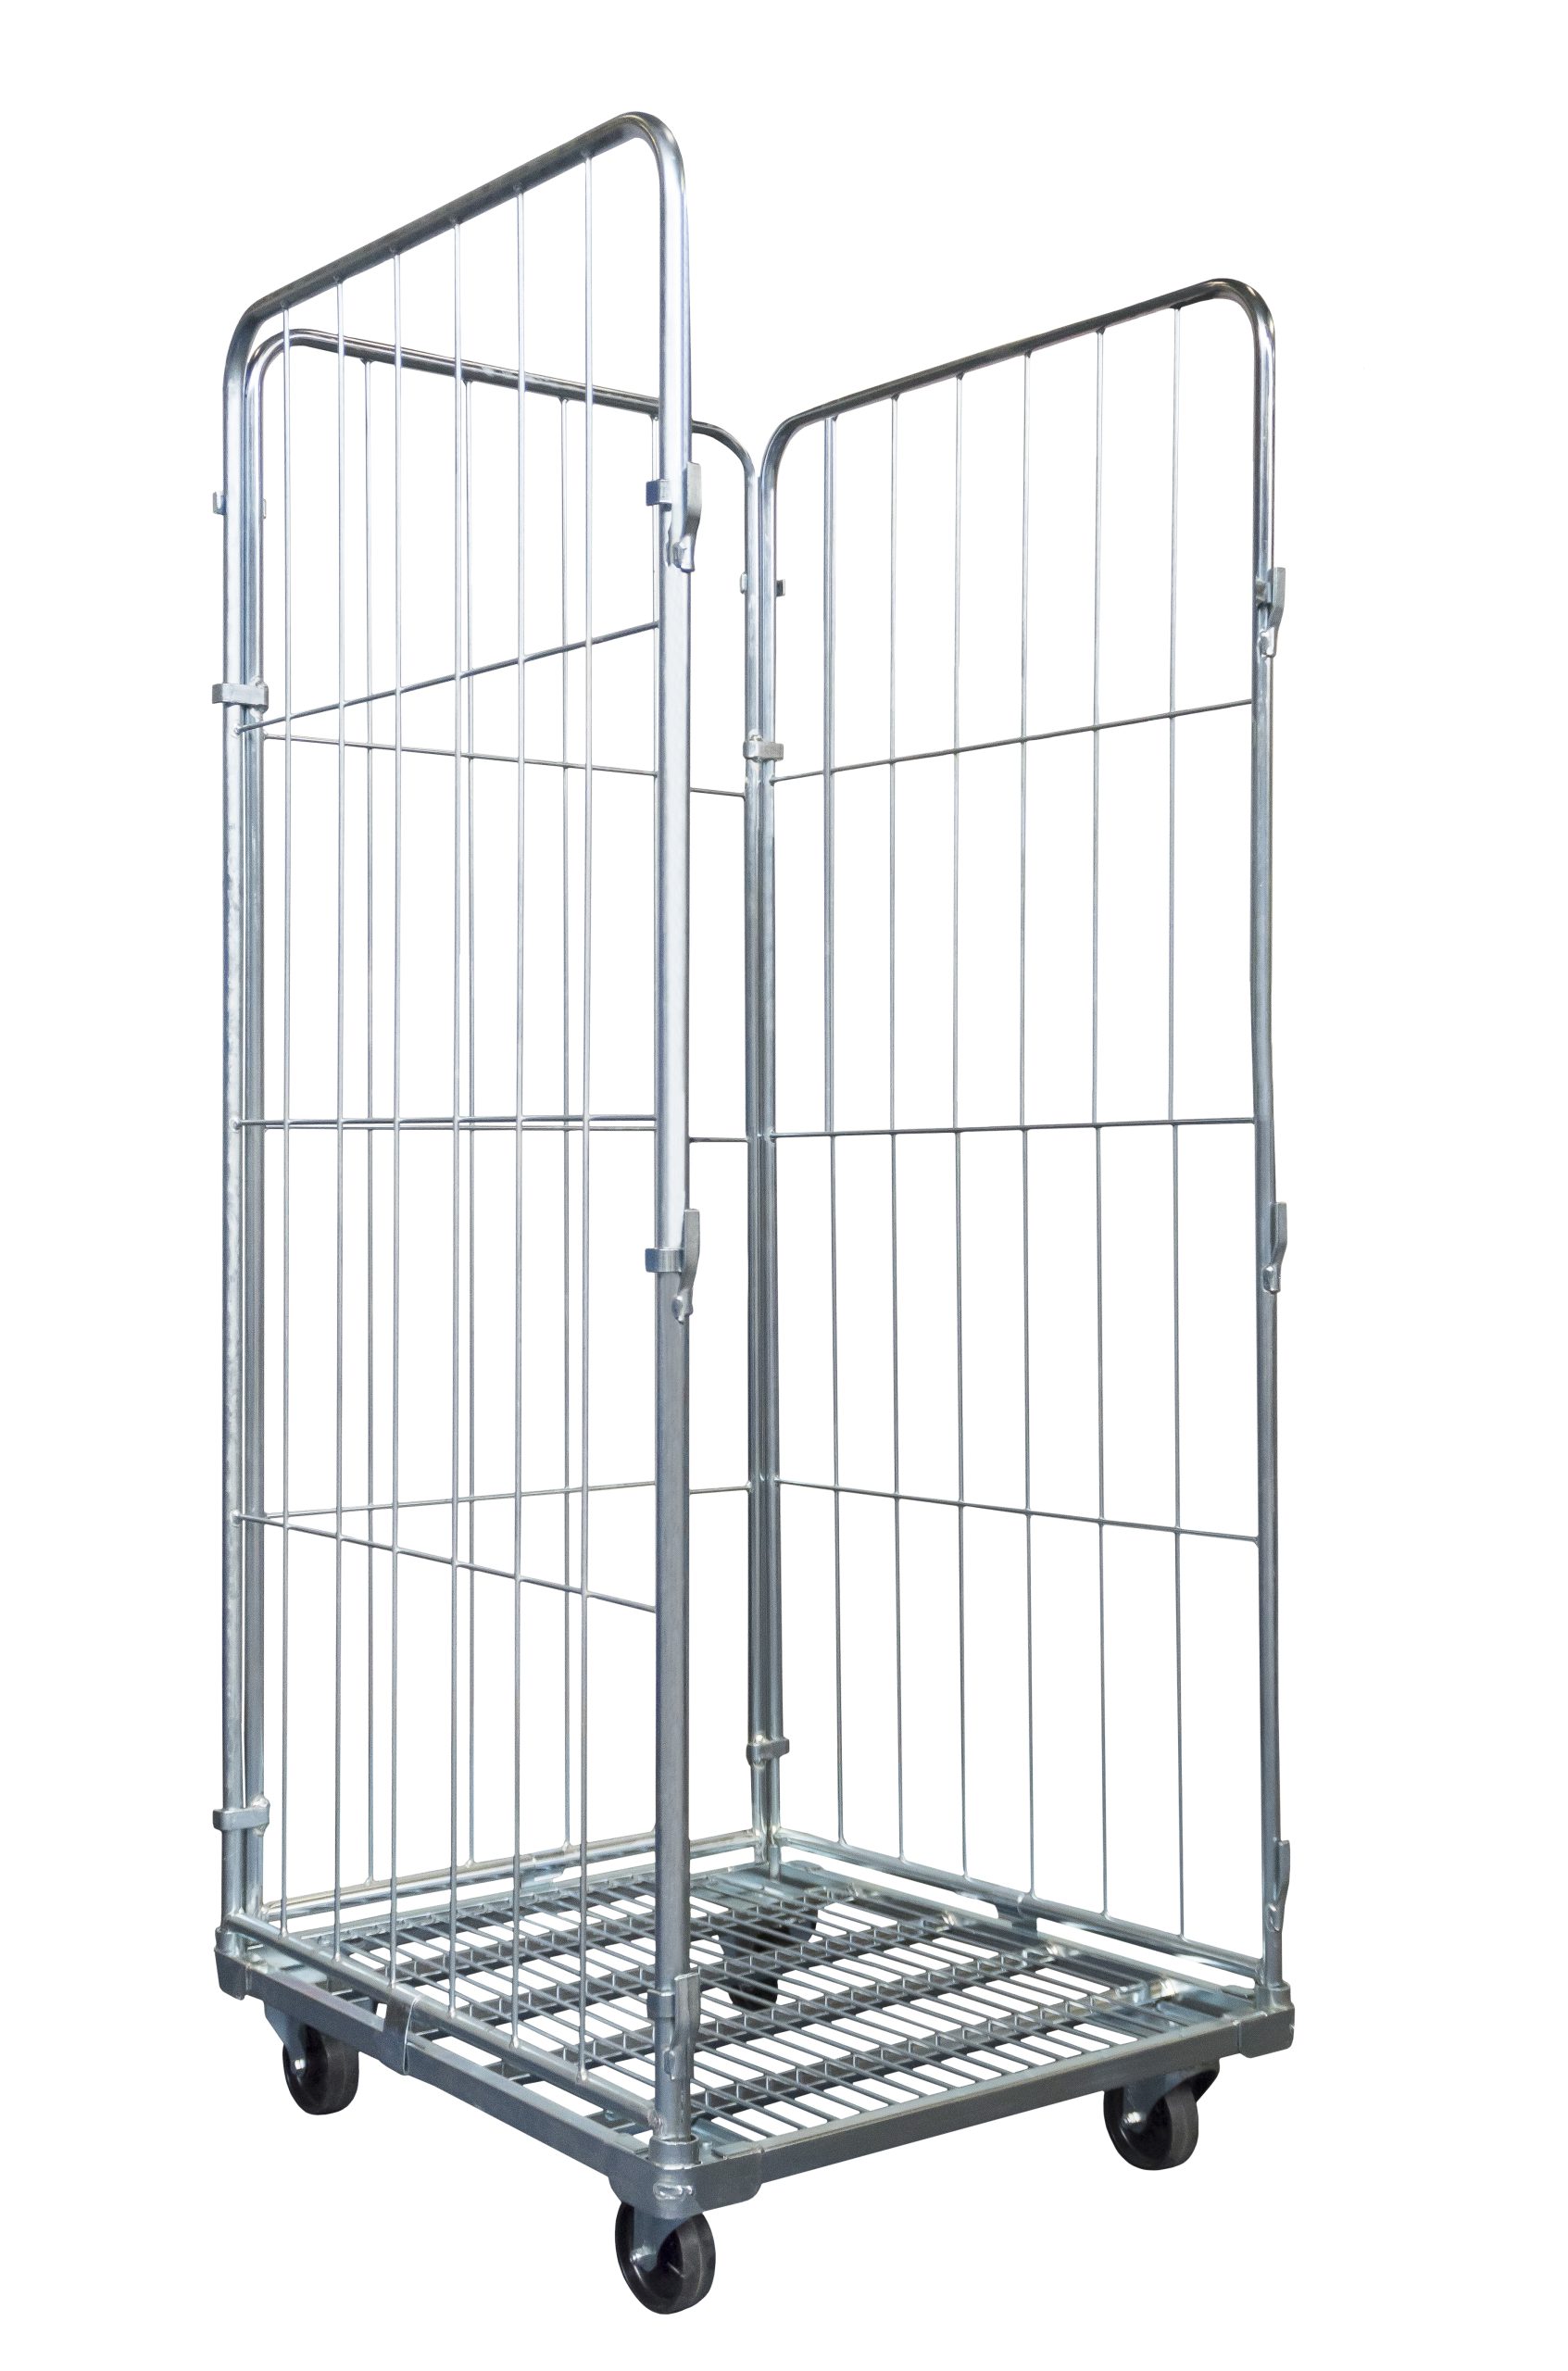 Laundry Roll Cage 800x720x1800 400 Front Load mm Gate, Hinged kg | Container for rent Rotomrent Capacity